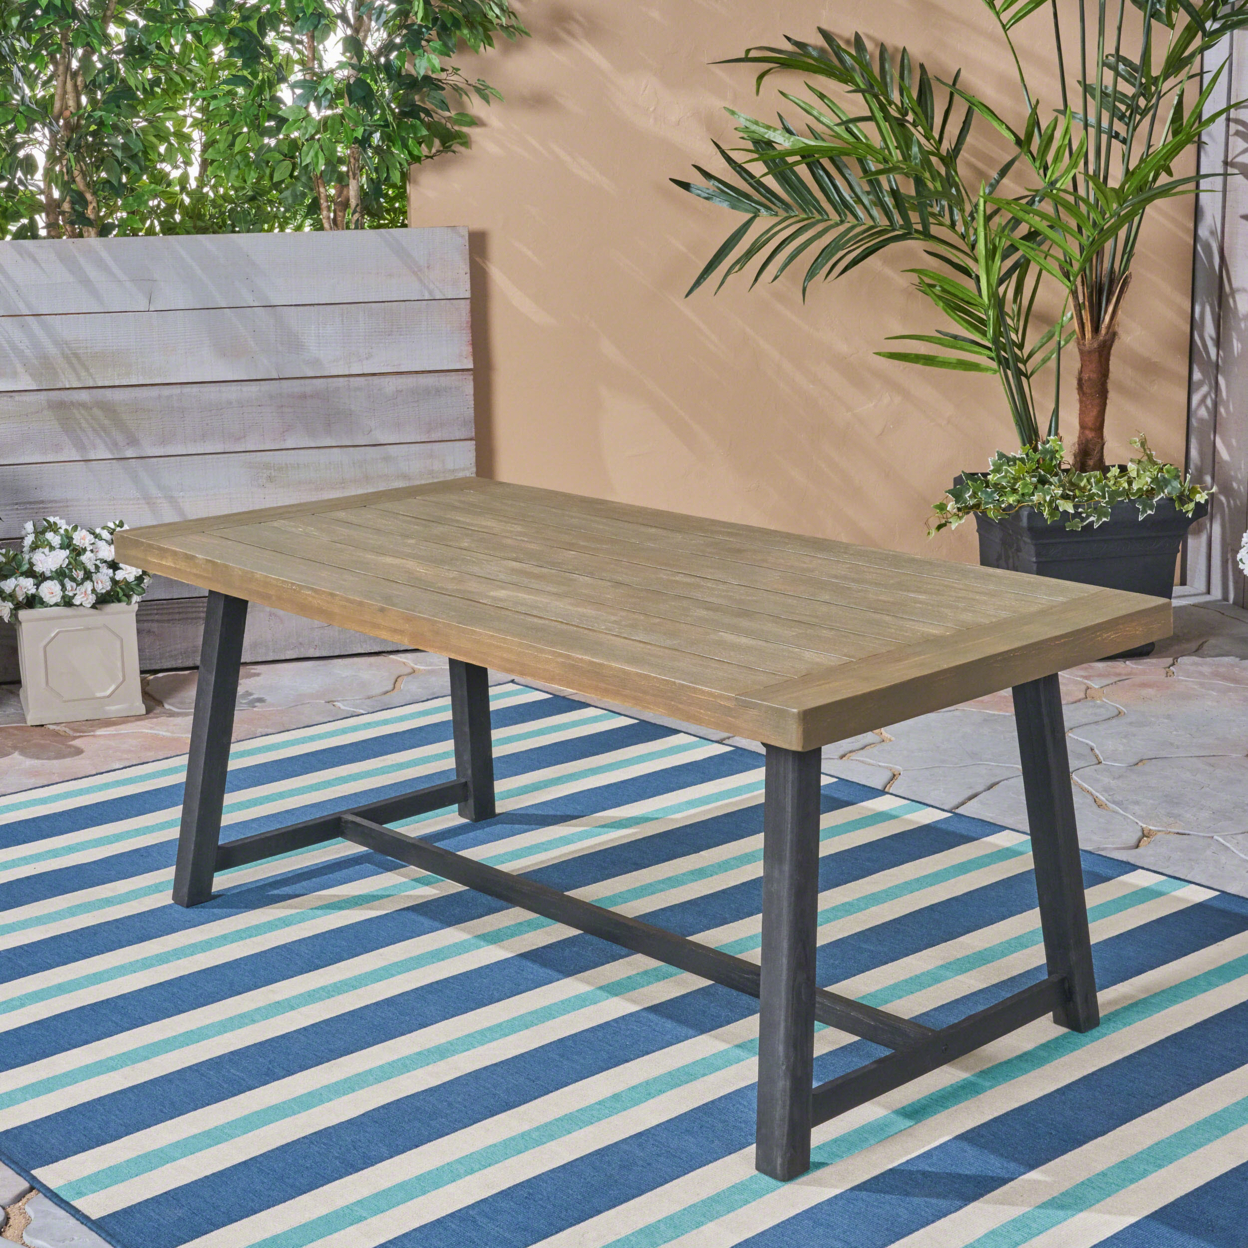 Toby Outdoor Acacia Wood Dining Table - Teak